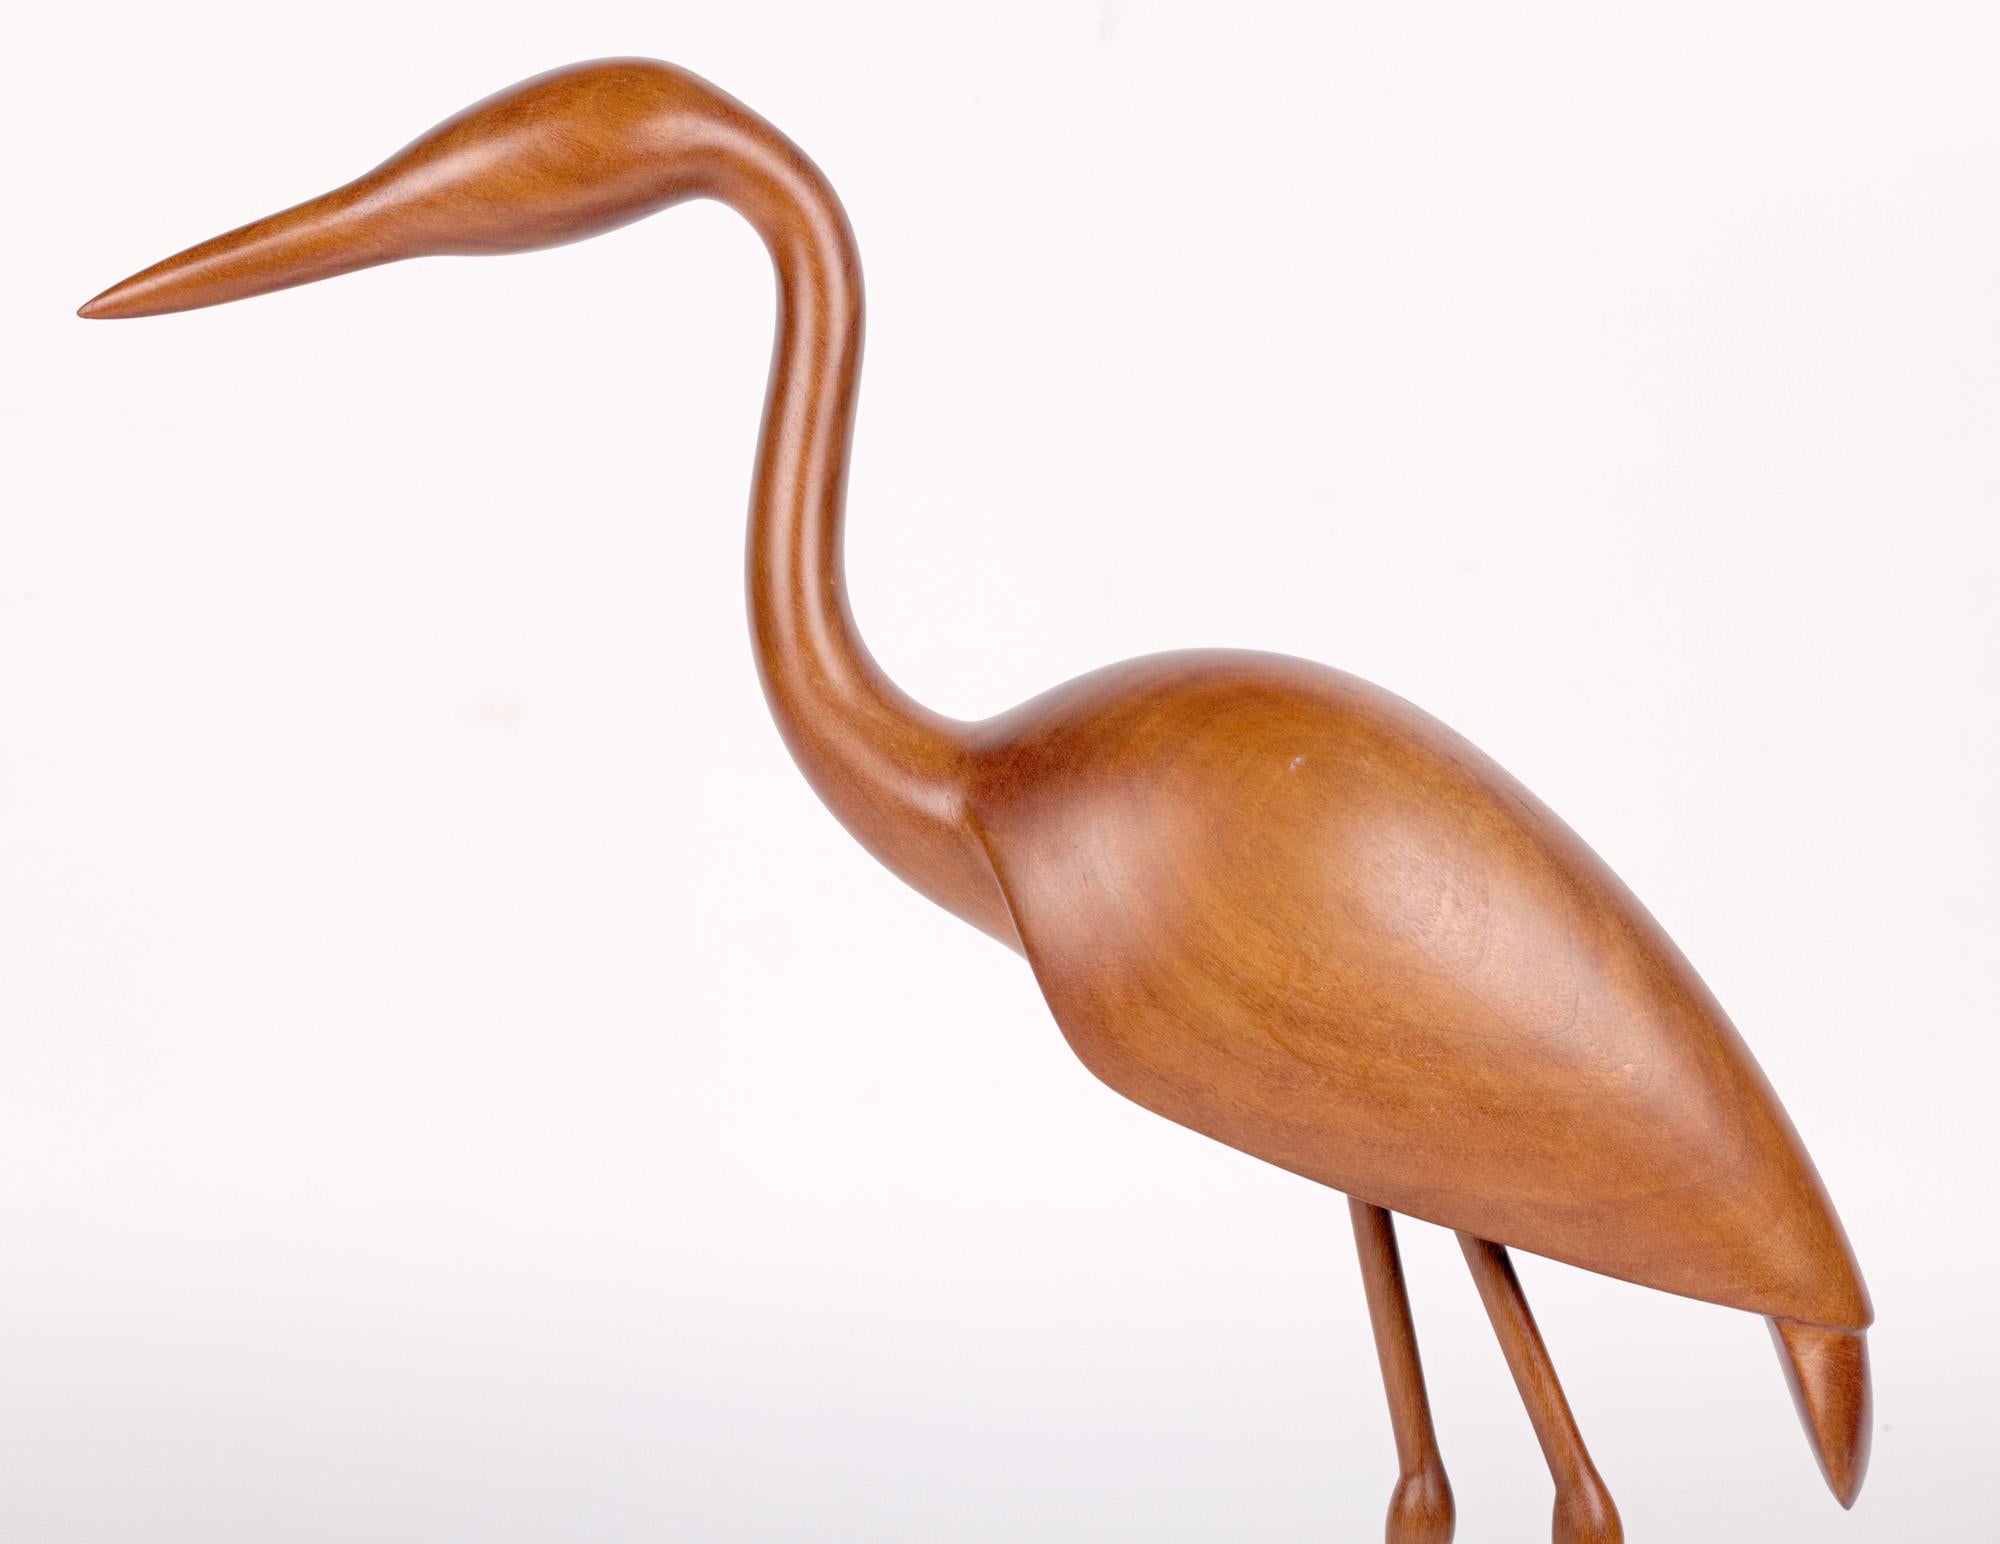 A stunning modern hand carved figure of a heron by renowned British wood carver Michael John Crook and dating from the latter 20th or very early 21st Century. The figure stands mounted on a hard wood oval shaped base representing water with the feet